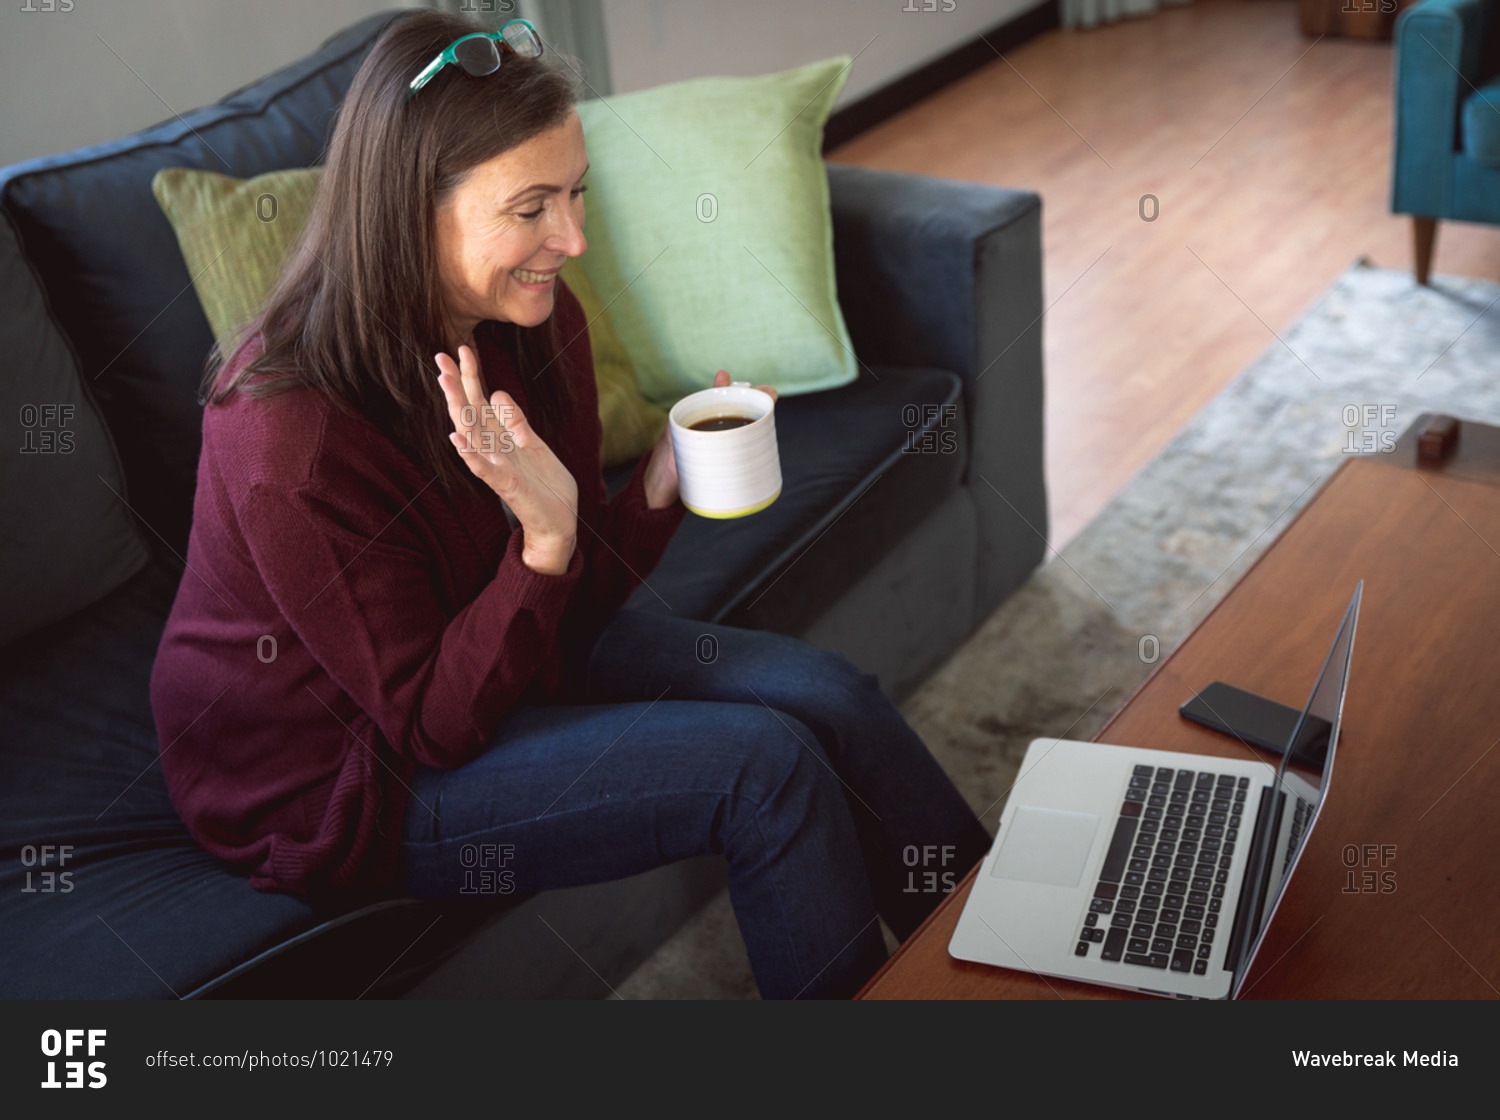 Caucasian woman enjoying time at home, social distancing and self isolation in quarantine lockdown, sitting on sofa in sitting room, using a laptop, waving during video call.